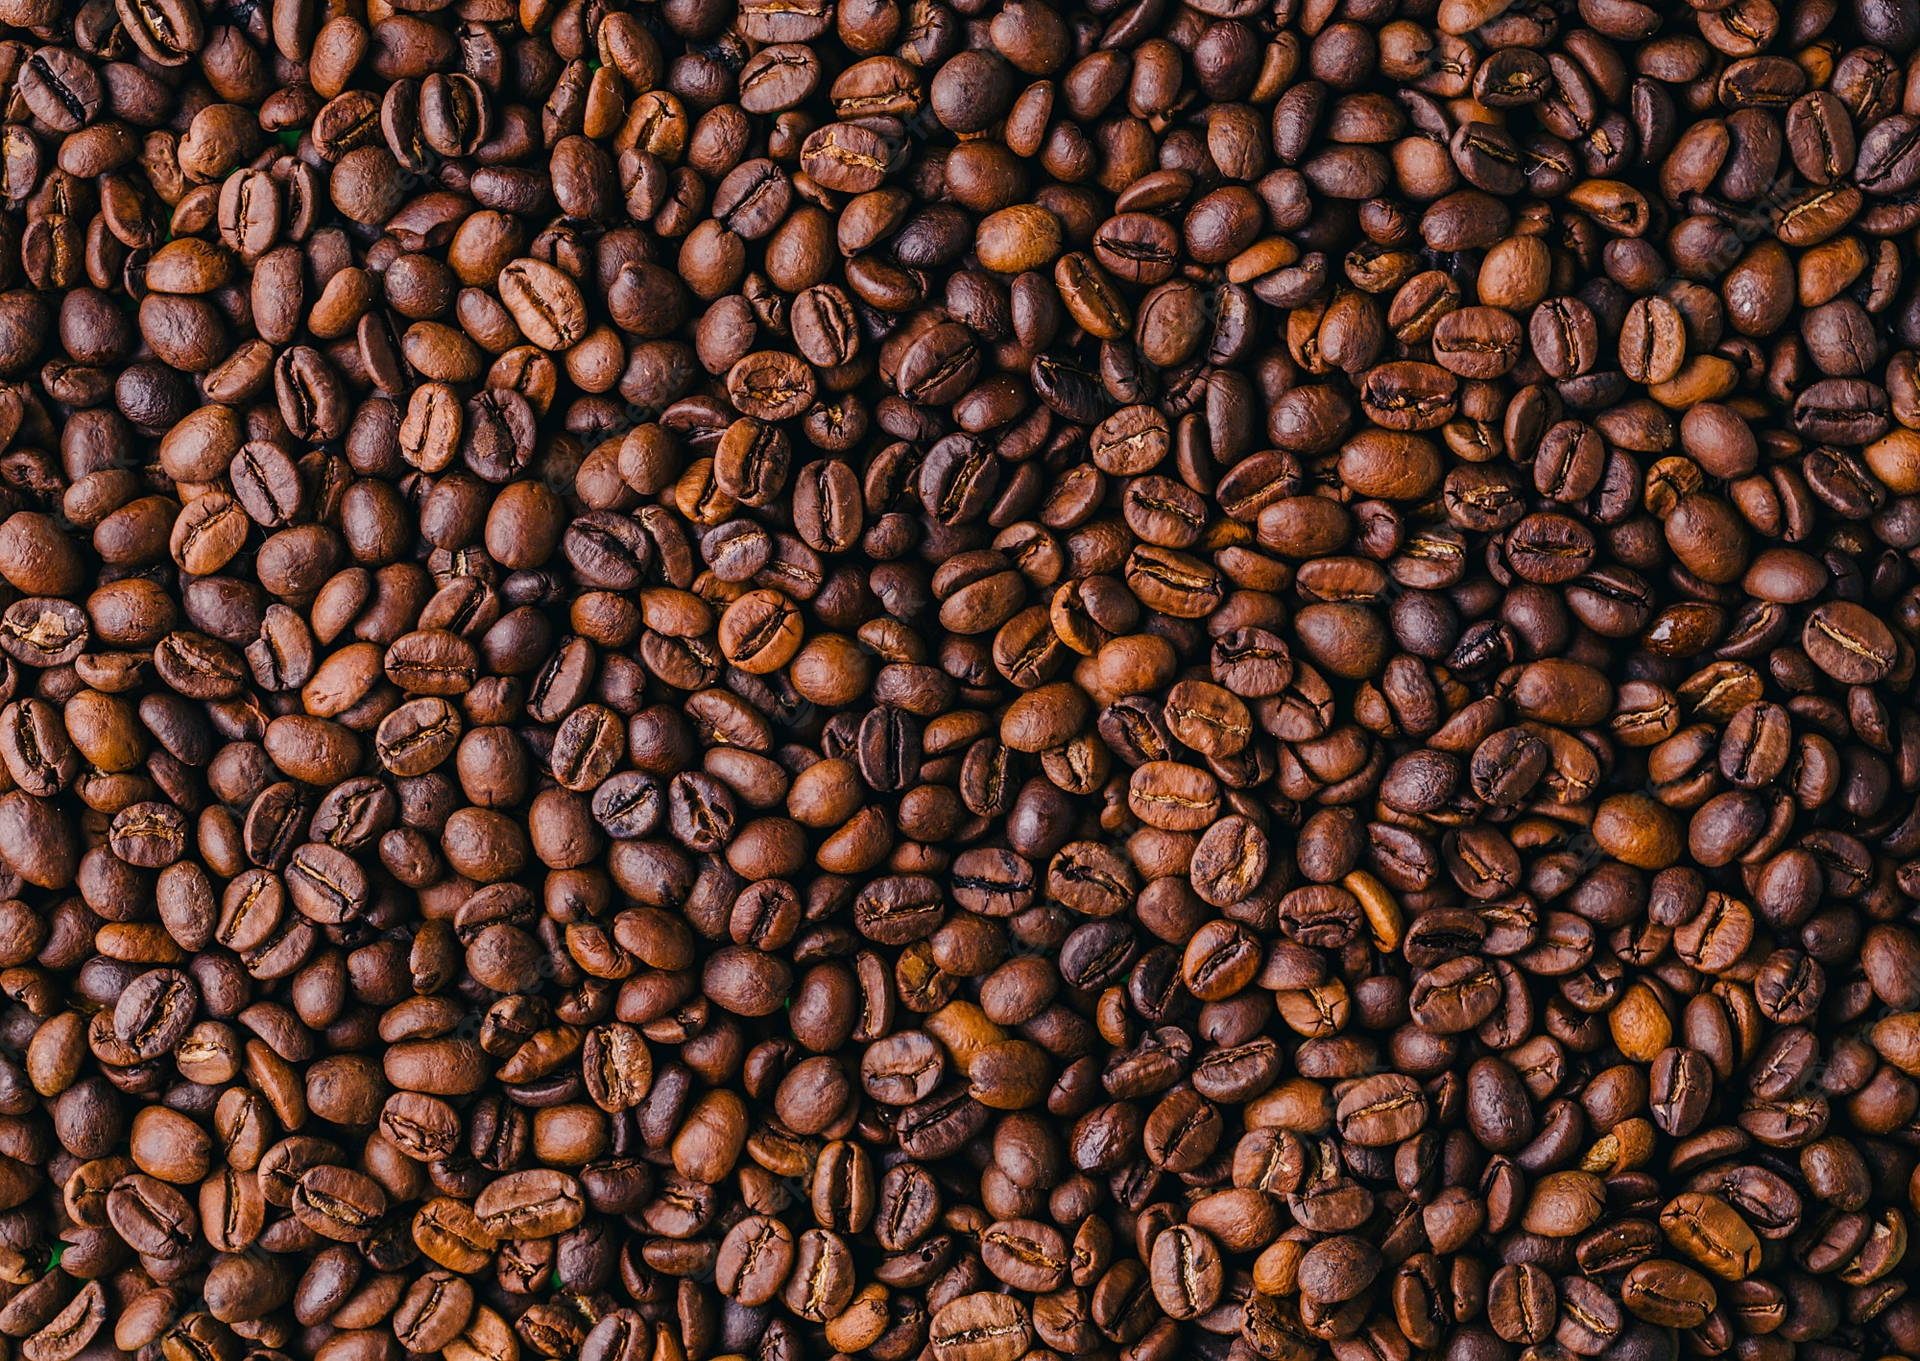 Large Area Of Coffee Beans Background